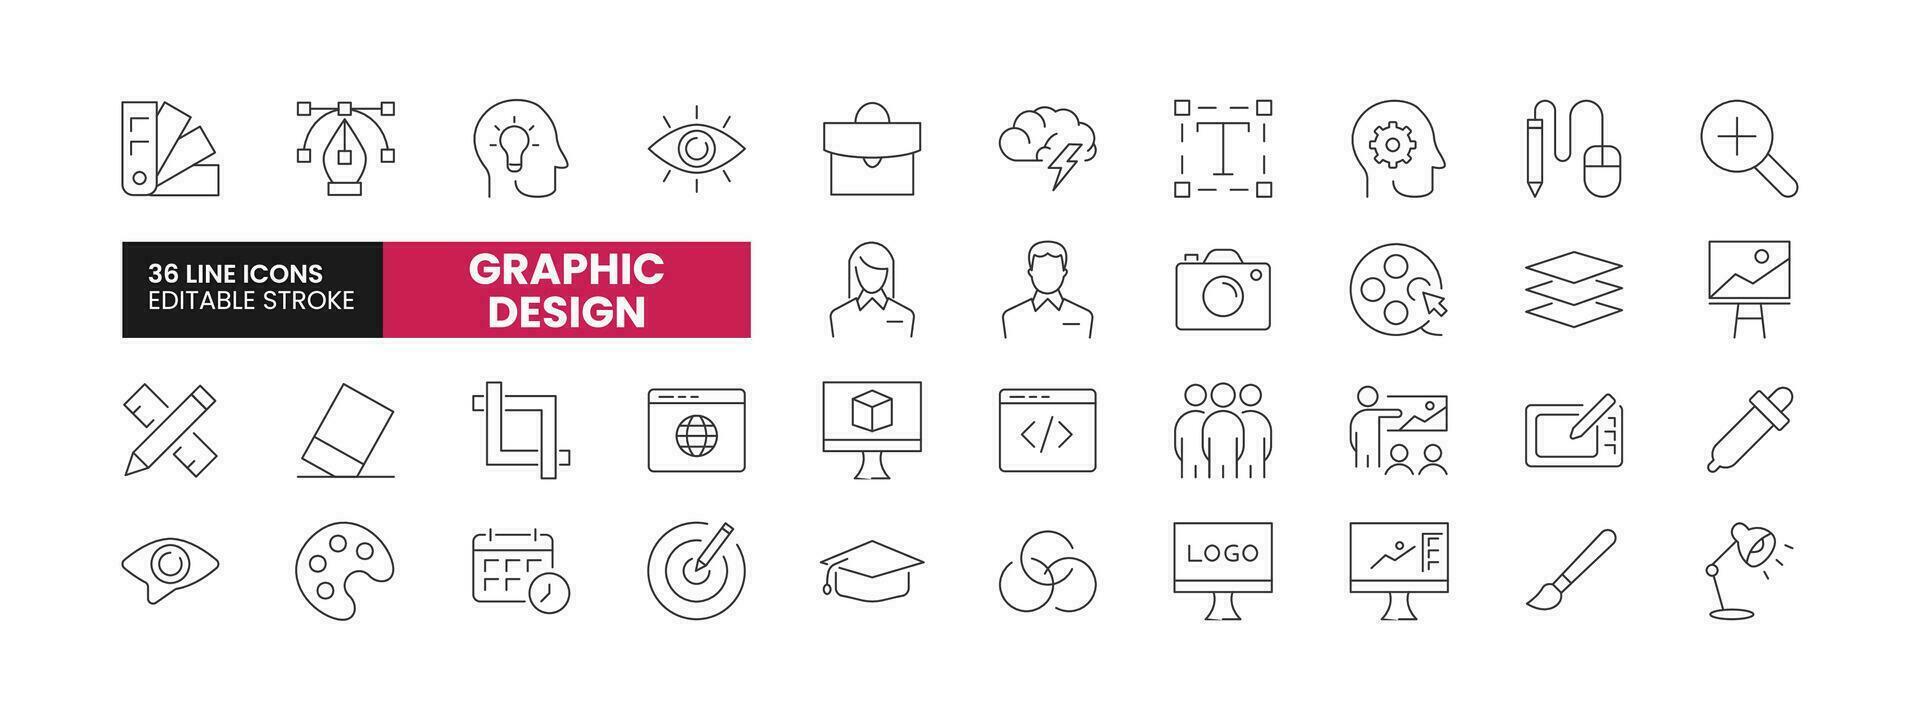 Set of 36 Graphic Design line icons set. Graphic Design outline icons with editable stroke collection. Includes Designing, Brush, Typography, Tools, Digital Art and More. vector